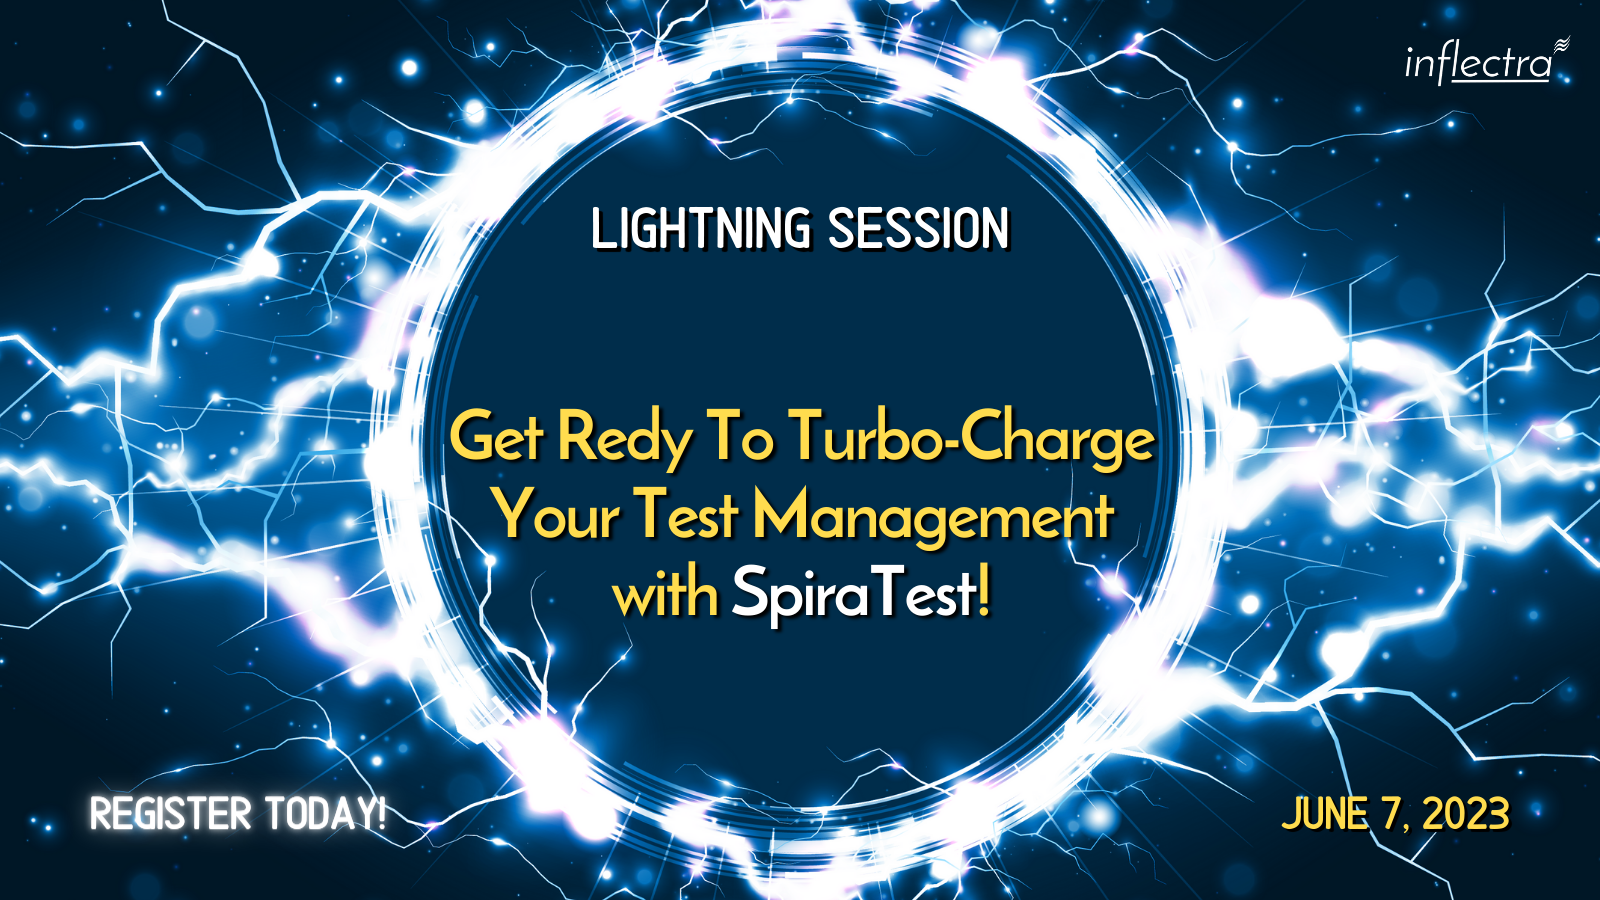 lightning-session-get-ready-to-turbo-charge-your-test-management-with-spira-test-inflectra-image